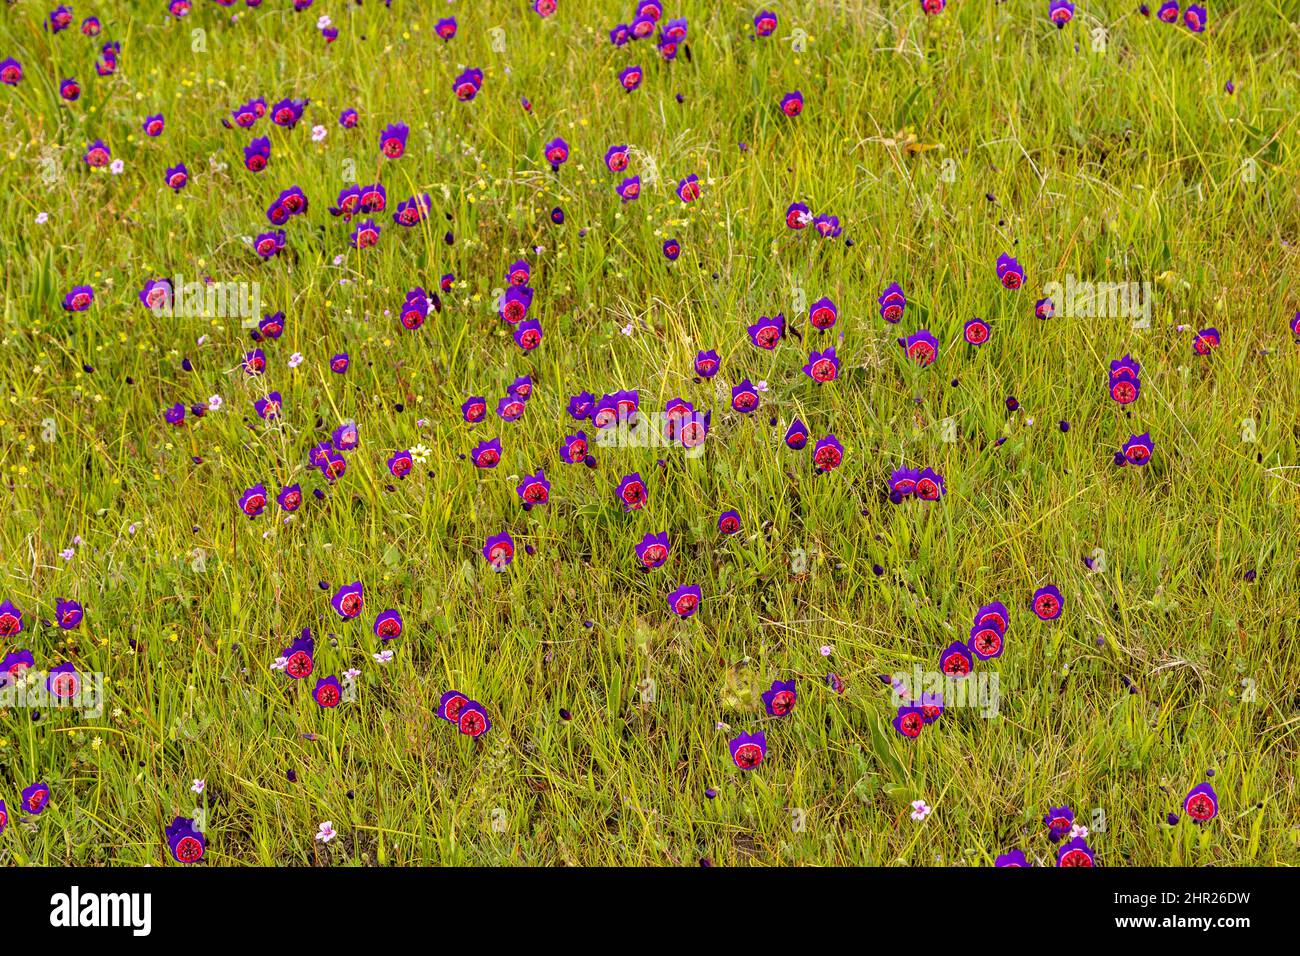 South African Wilflower: Mass flowering of Geissorhiza radians in renosterveld vegetation near Darling in the Western Cape of South Africa Stock Photo